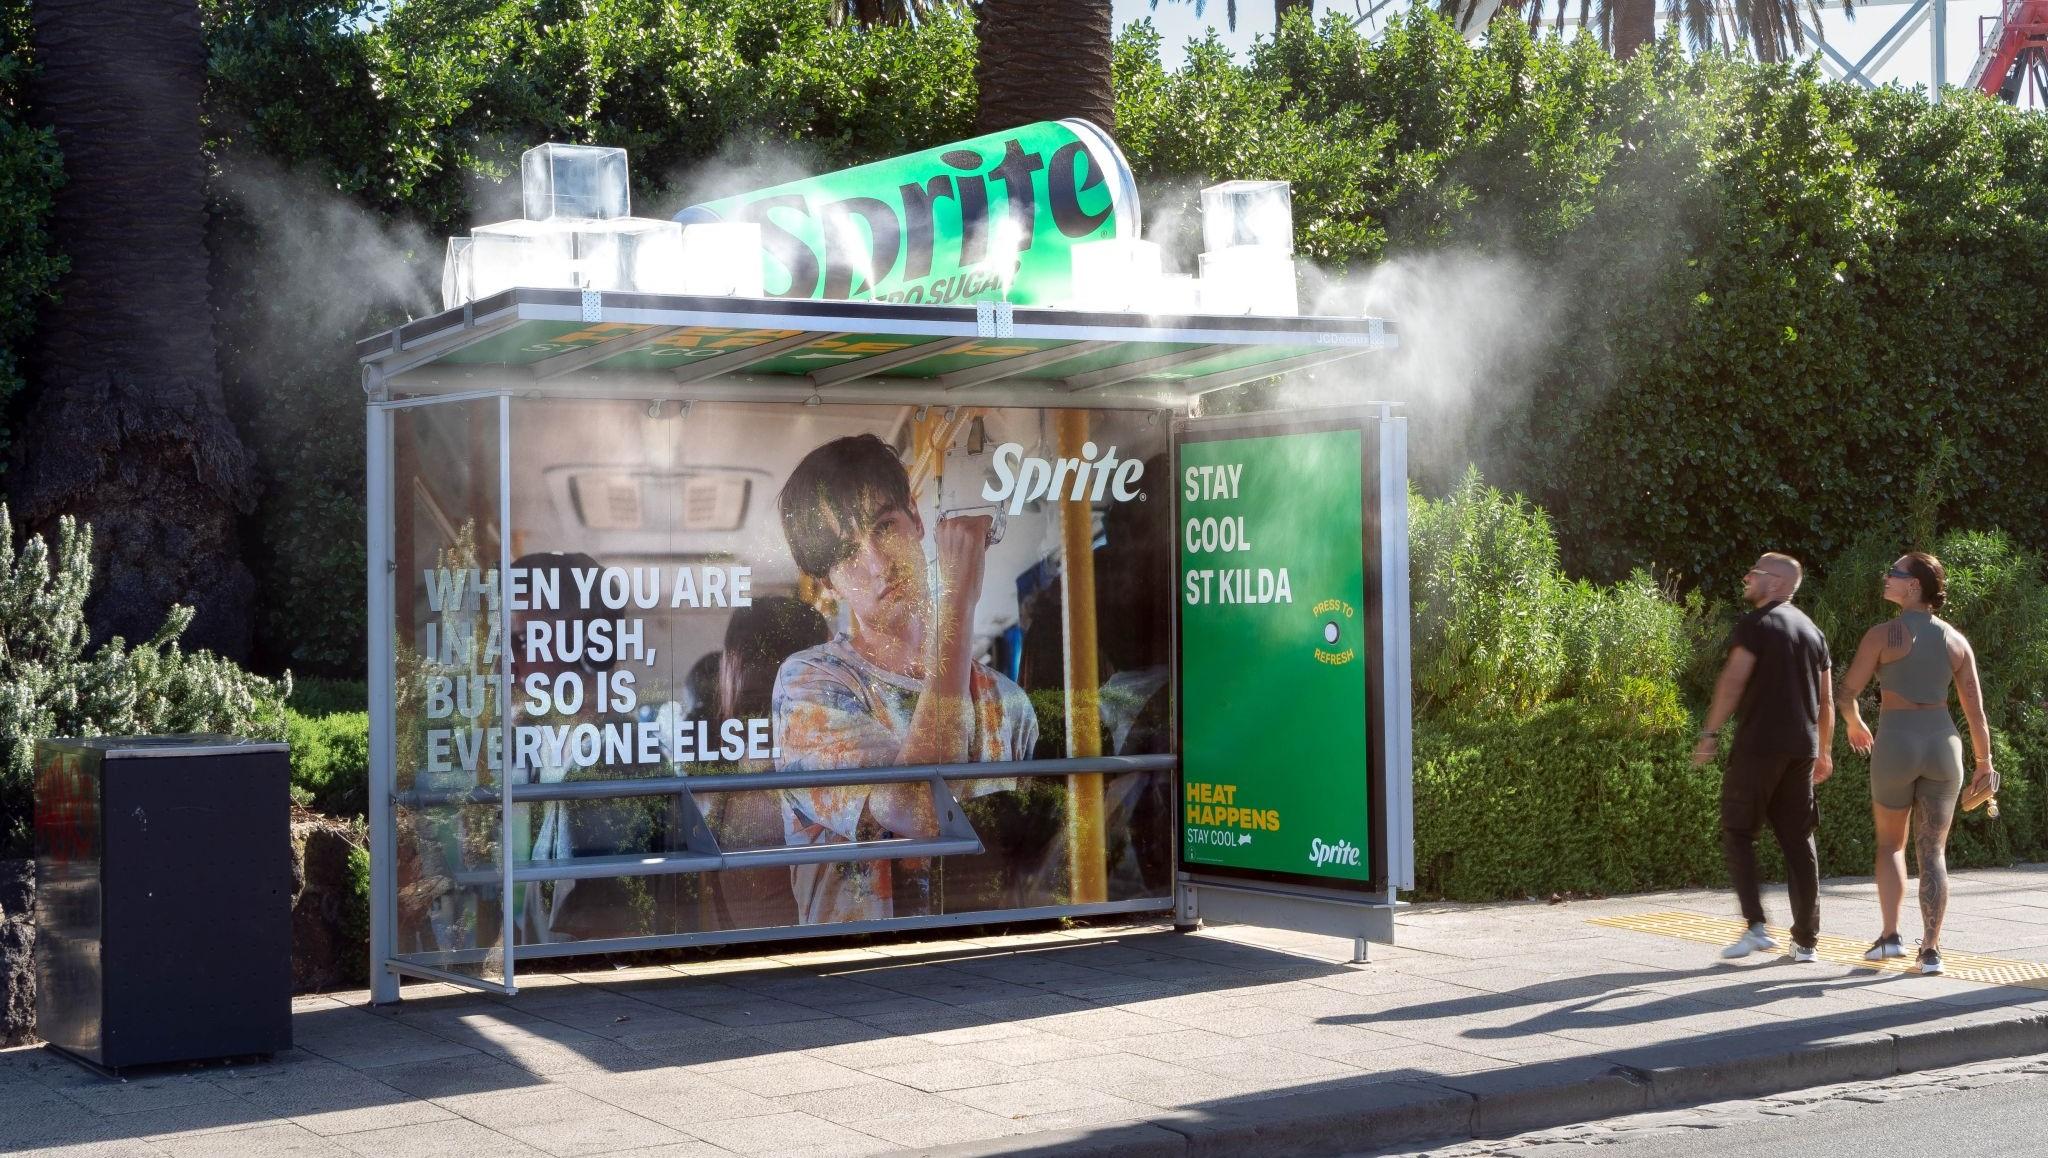 Unidentified bus stop with a Sprite can on its top spraying out mist.